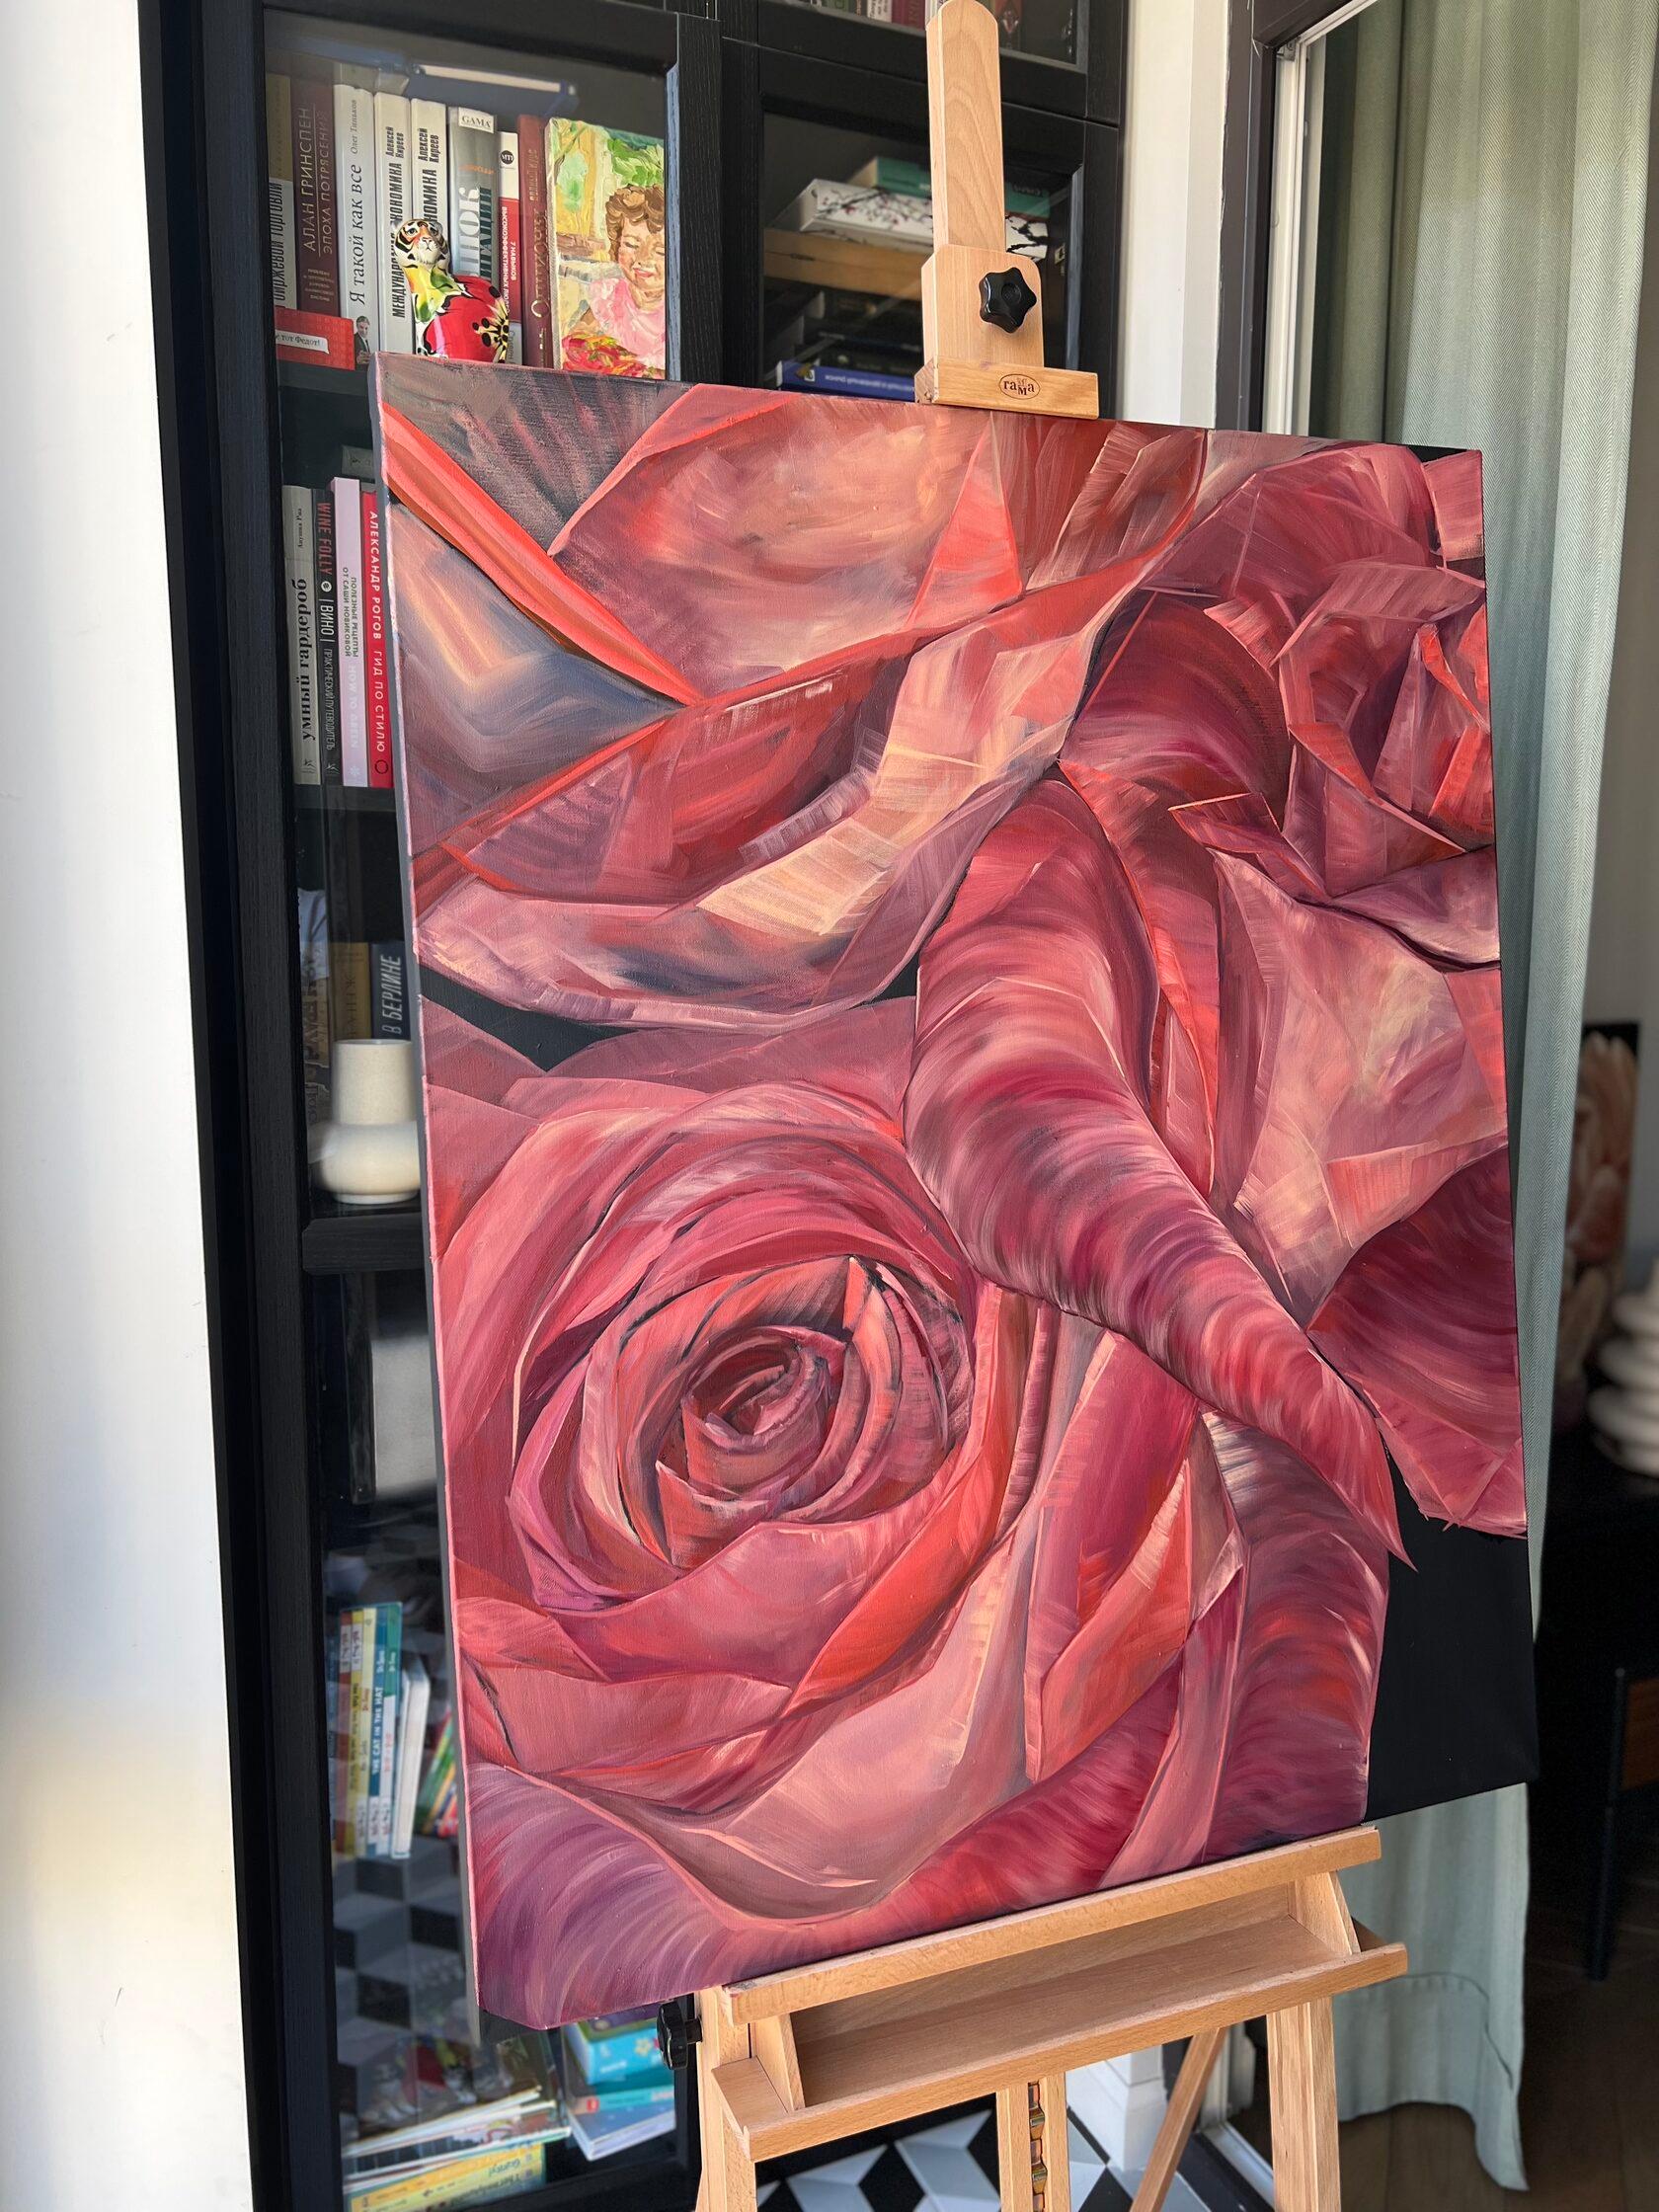 Red roses, 100x80cm
My paintings are a reflection of my inner space, I will call it a garden. What is this garden like? It's a little chaotic, a little bright, a little abstract, a little orderly, a little dramatic.
My inner garden becomes outer